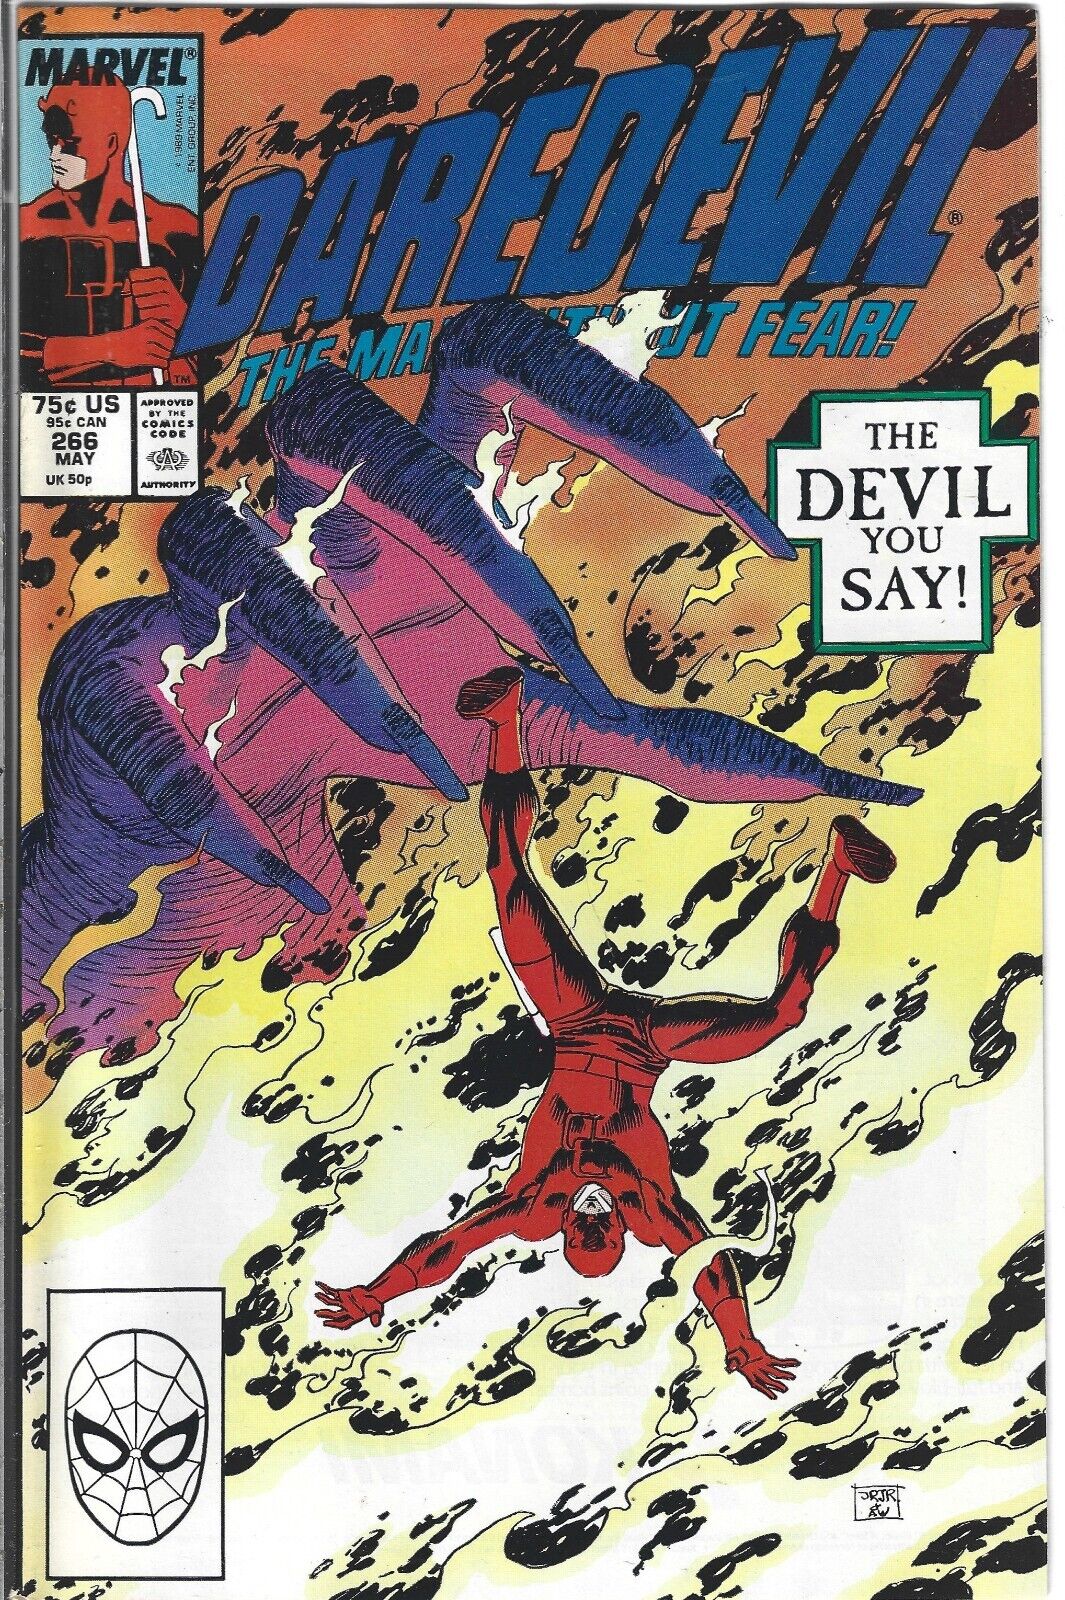 DAREDEVIL #266 (NM) HIGH GRADE COPPER AGE MARVEL, $3.95 FLAT RATE SHIPPING